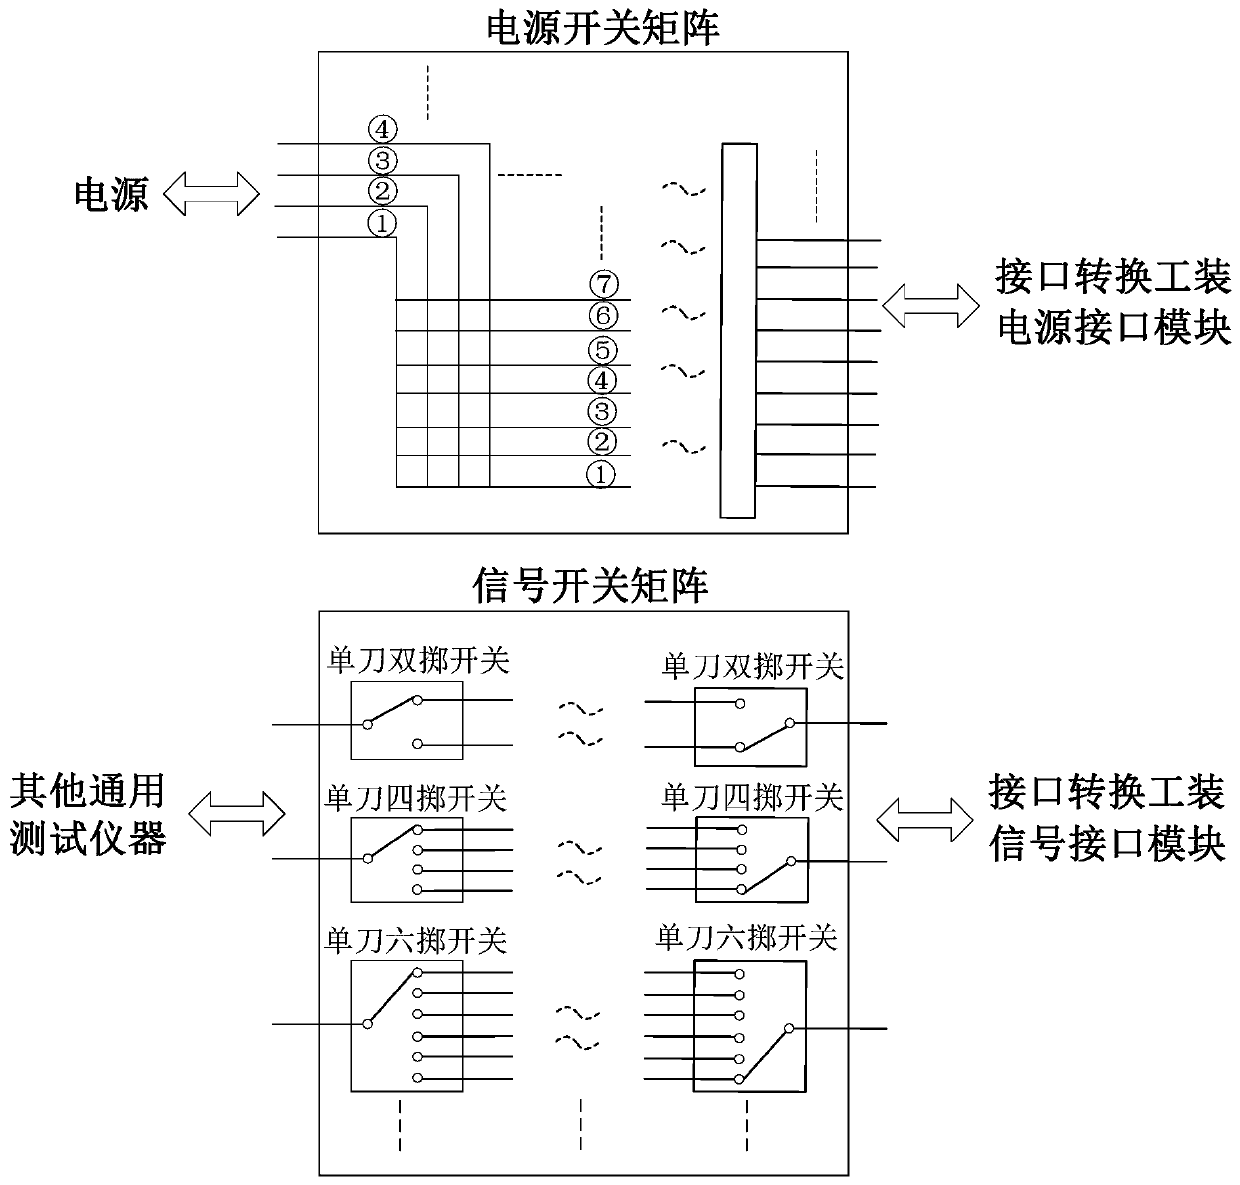 General automatic test system for radio frequency assembly